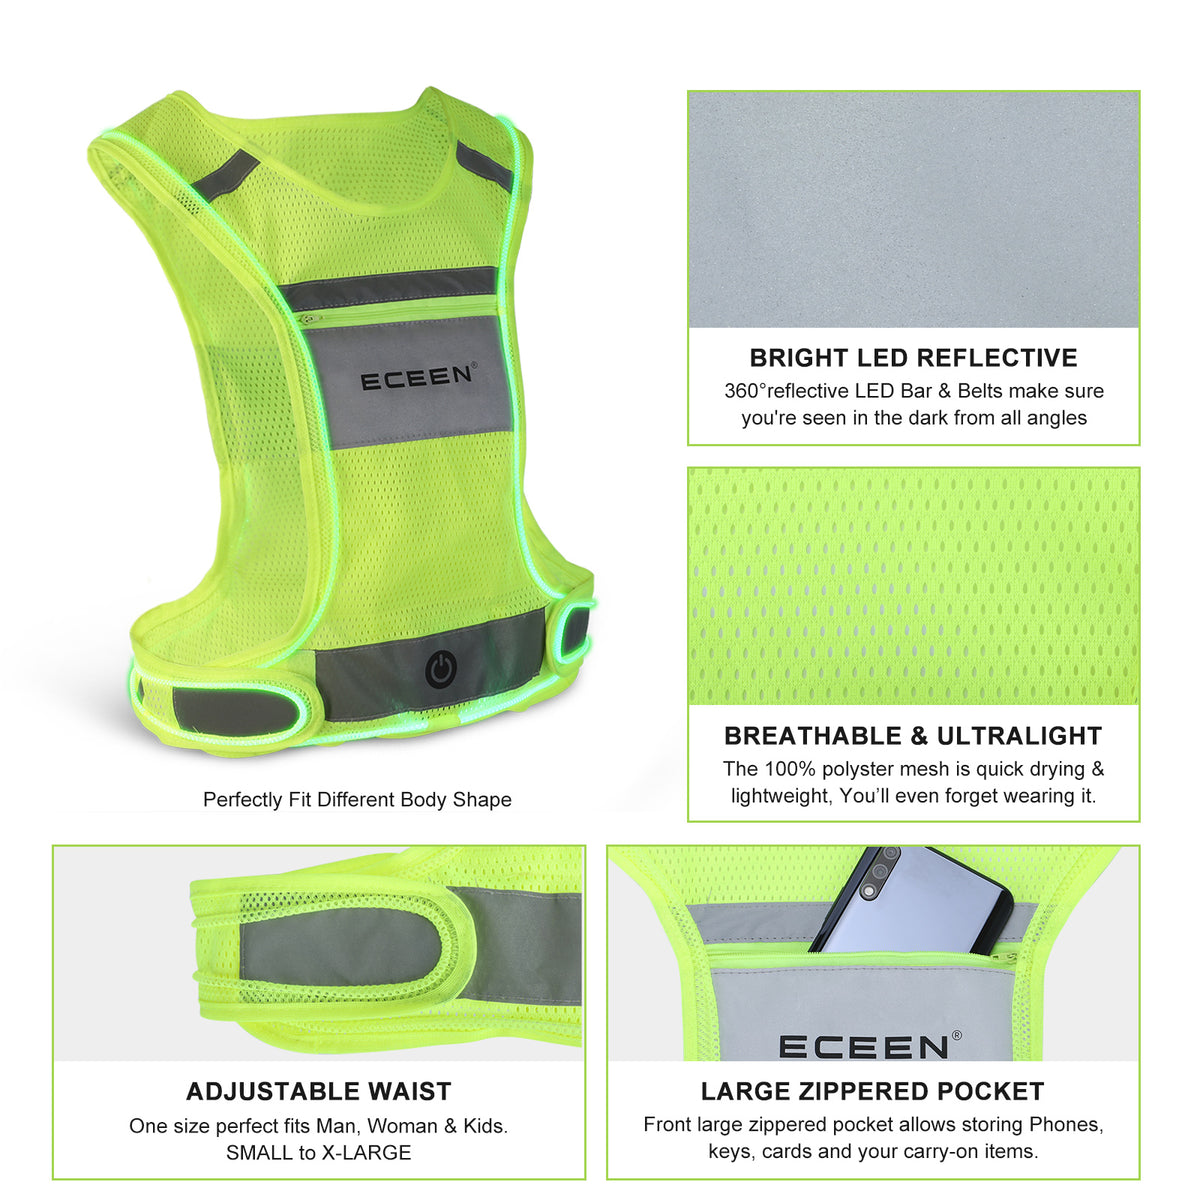 ECEEN LED Reflective Vest with Pouch USB Rechargeable Bright Safety Lights Belt High Visibility & Adjustable Waist for Night Running Jogging Cycling 3 LED Glowing Modes Reflector Strips 